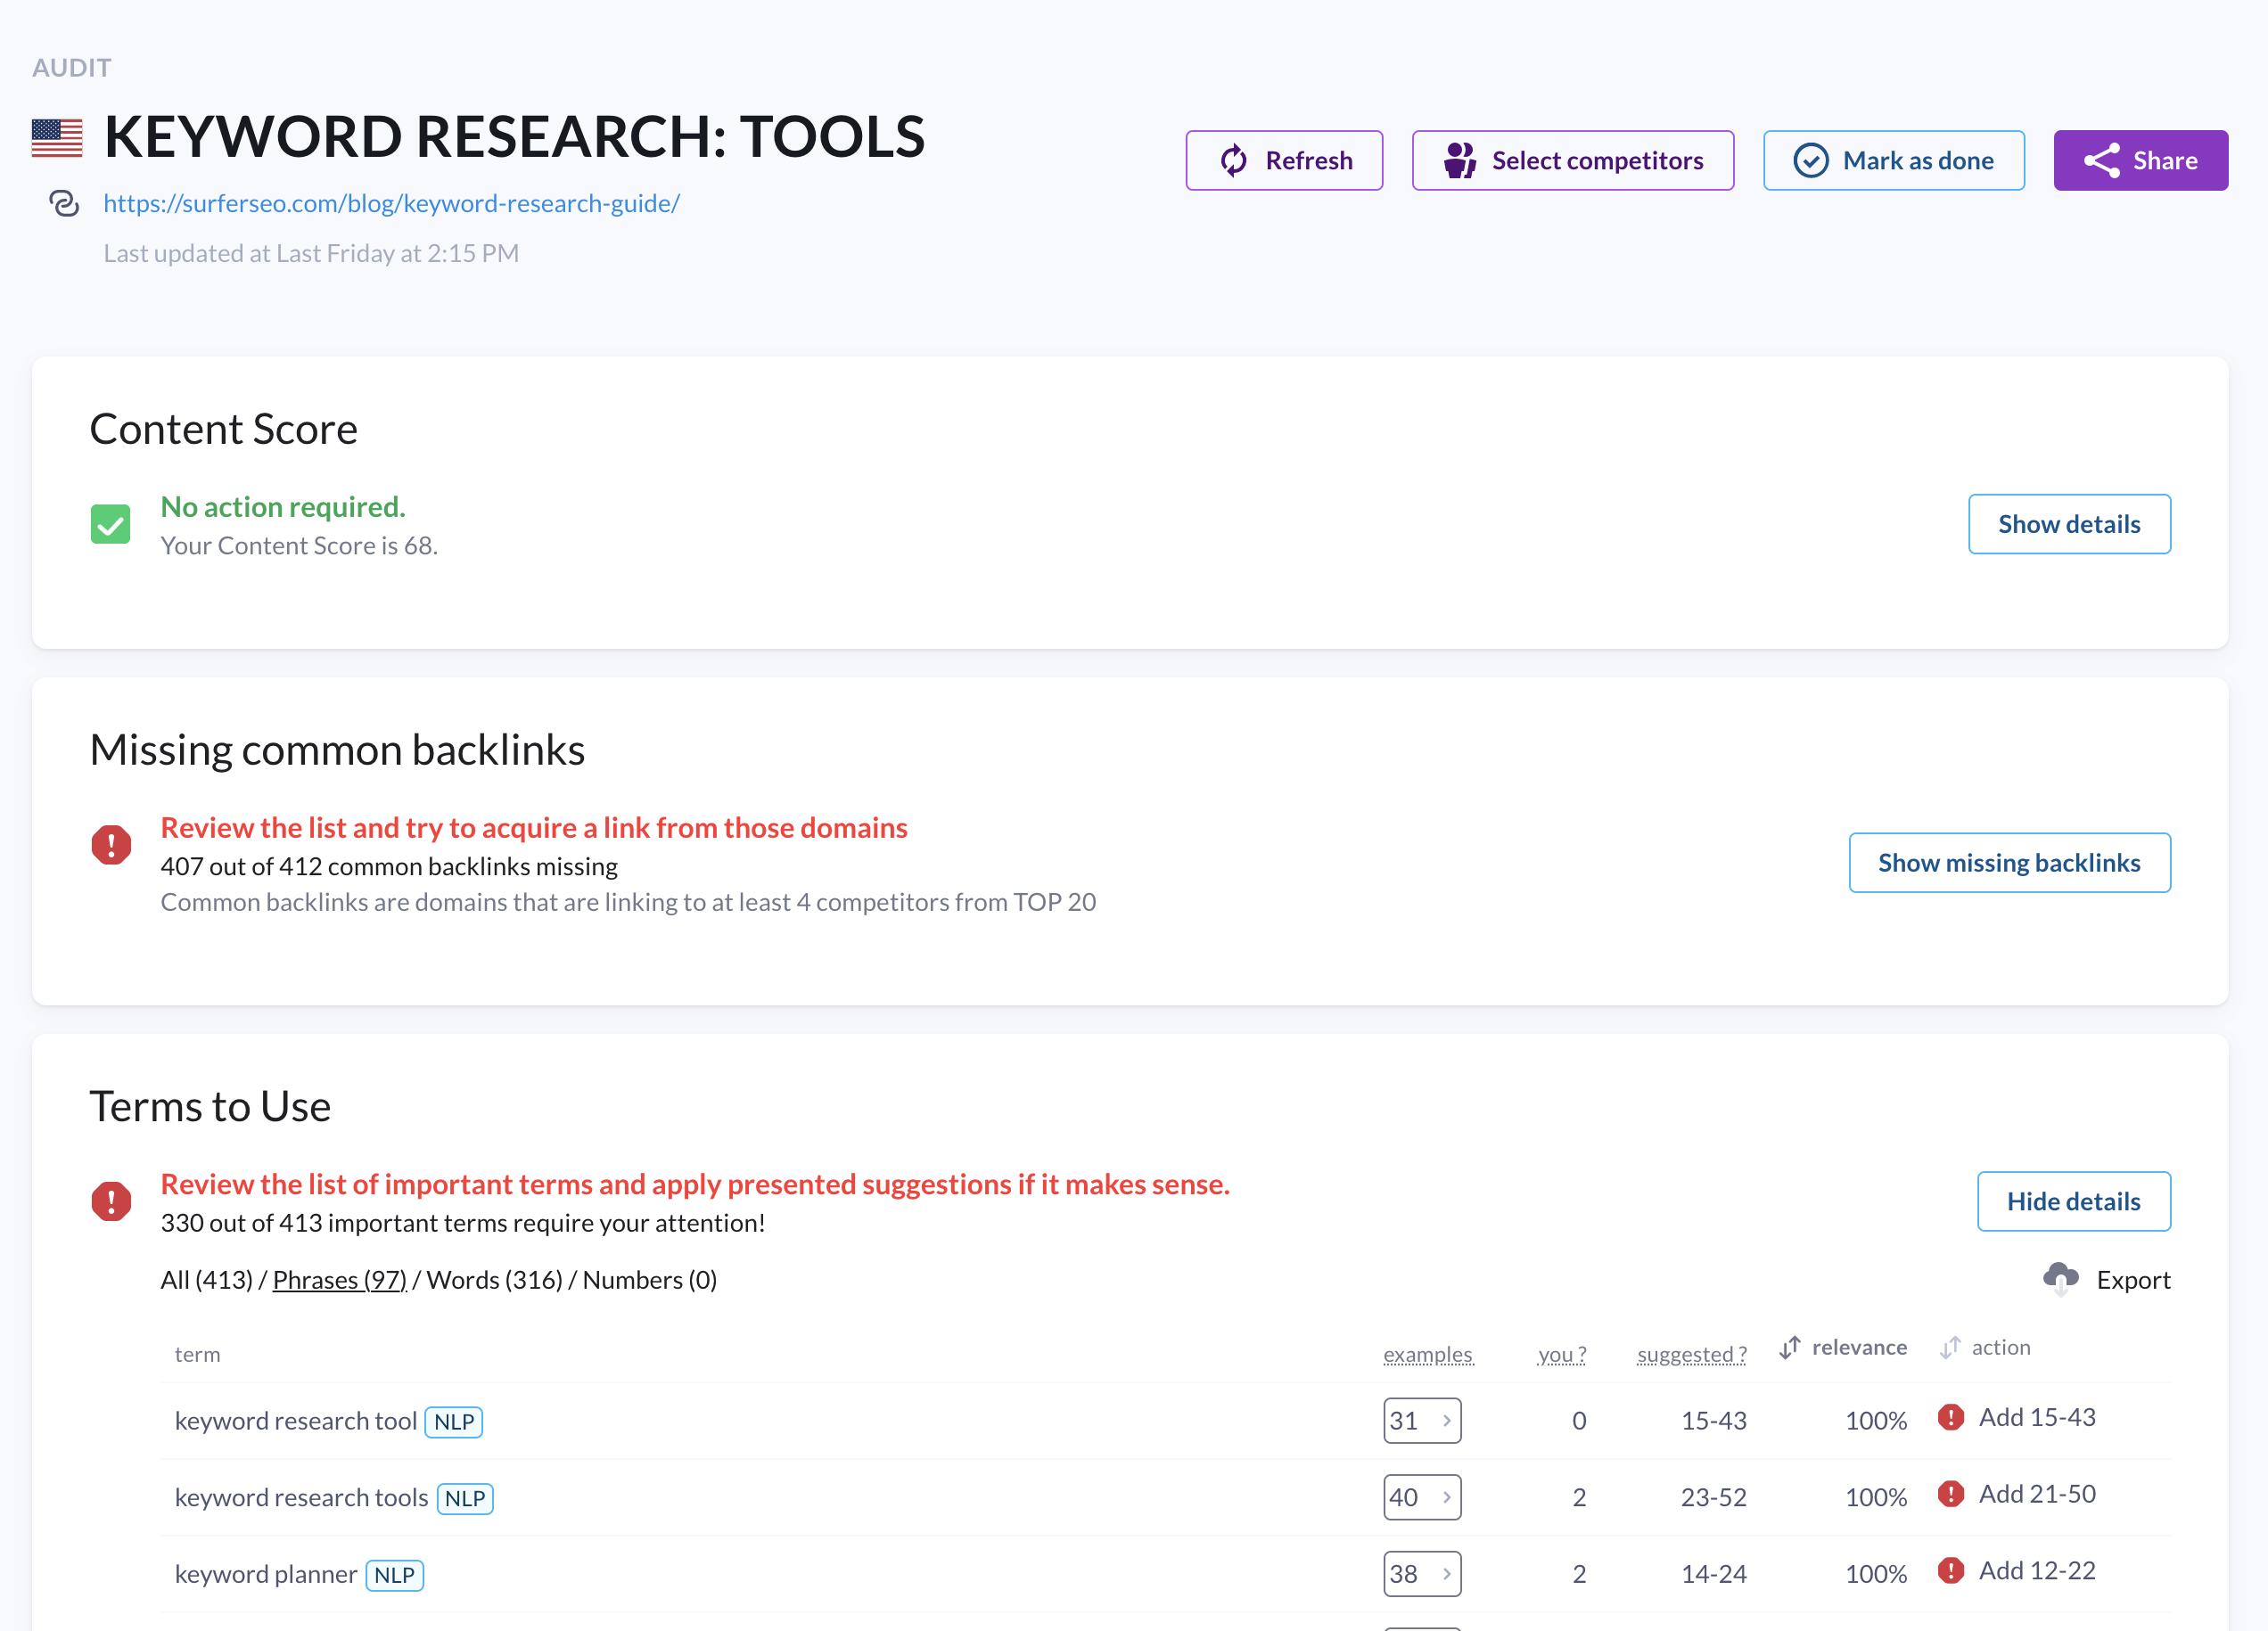 Keyword research tools in Surfer